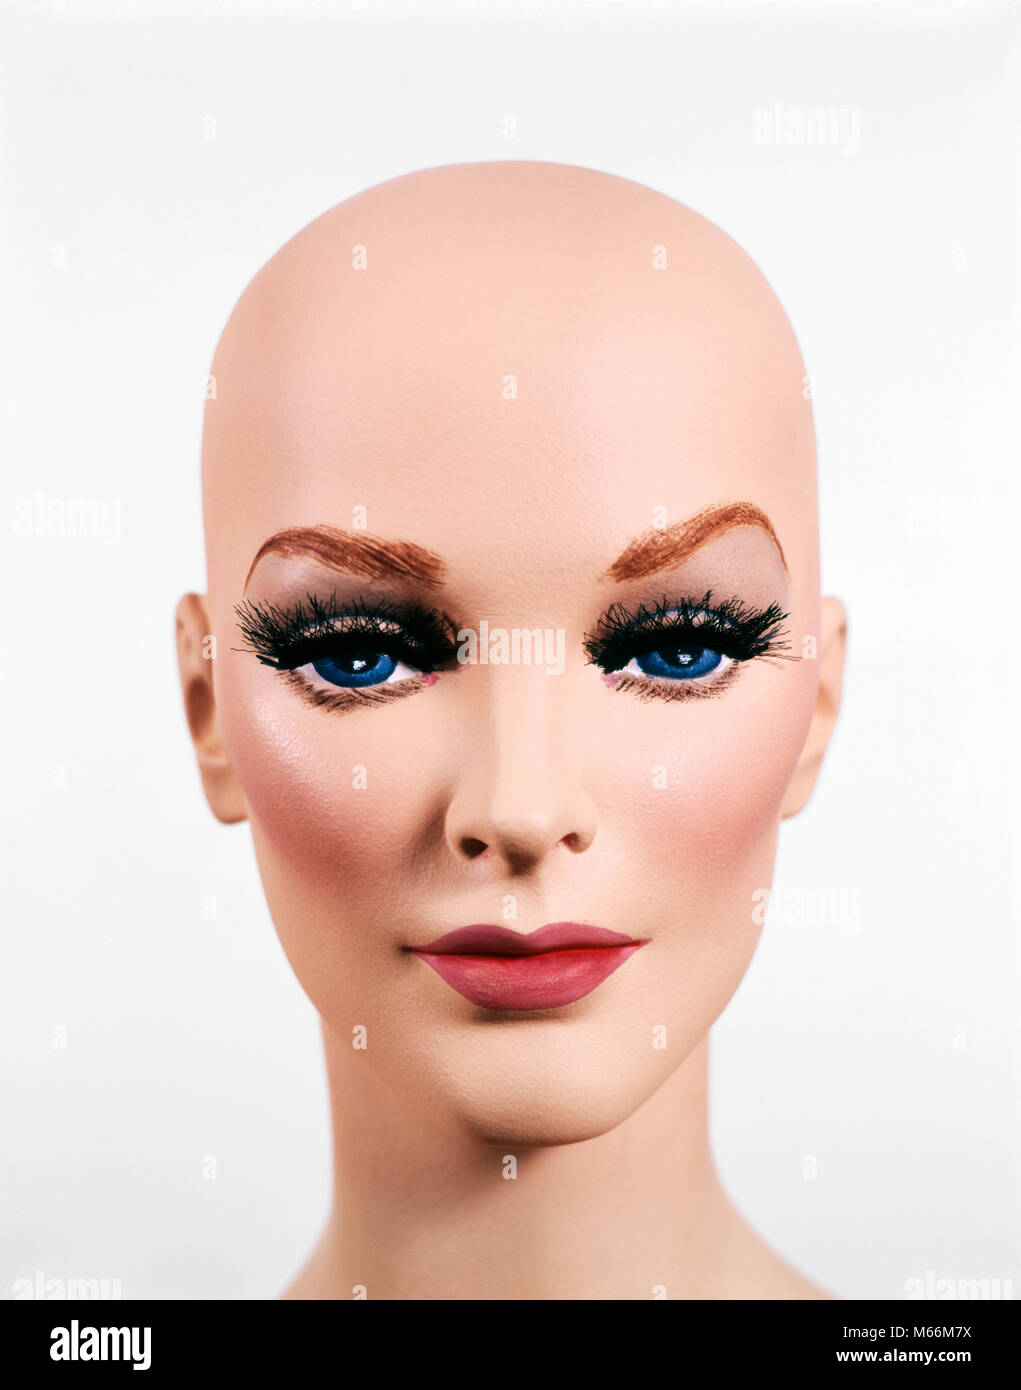 BALD HEAD OF FEMALE MANNEQUIN DUMMY LOOKING AT CAMERA - kg6663 HAR001 HARS ZANY UNCONVENTIONAL CONCEPTUAL STILL LIFE IMAGINATION STARE IDIOSYNCRATIC RED LIPSTICK AMUSING ECCENTRIC PEOPLE ADULTS STIFF UNEMOTIONAL UNFEELING UNREAL CAUCASIAN ETHNICITY DUMMIES EMOTIONLESS ERRATIC IMITATION LOOKING AT CAMERA OCCUPATIONS OLD FASHIONED PERSONS Stock Photo